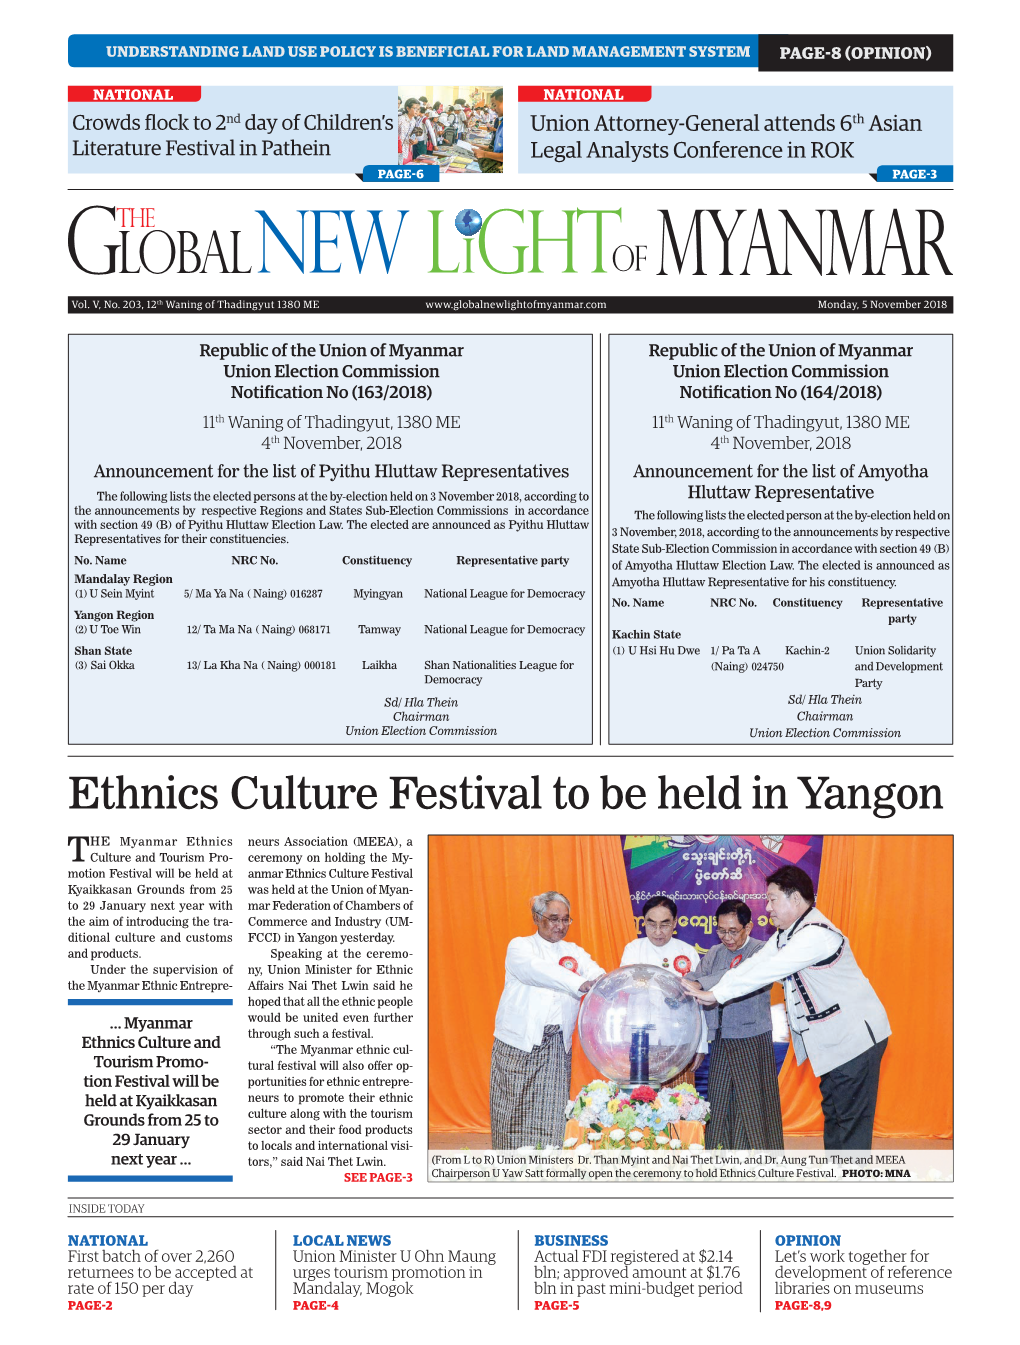 Ethnics Culture Festival to Be Held in Yangon